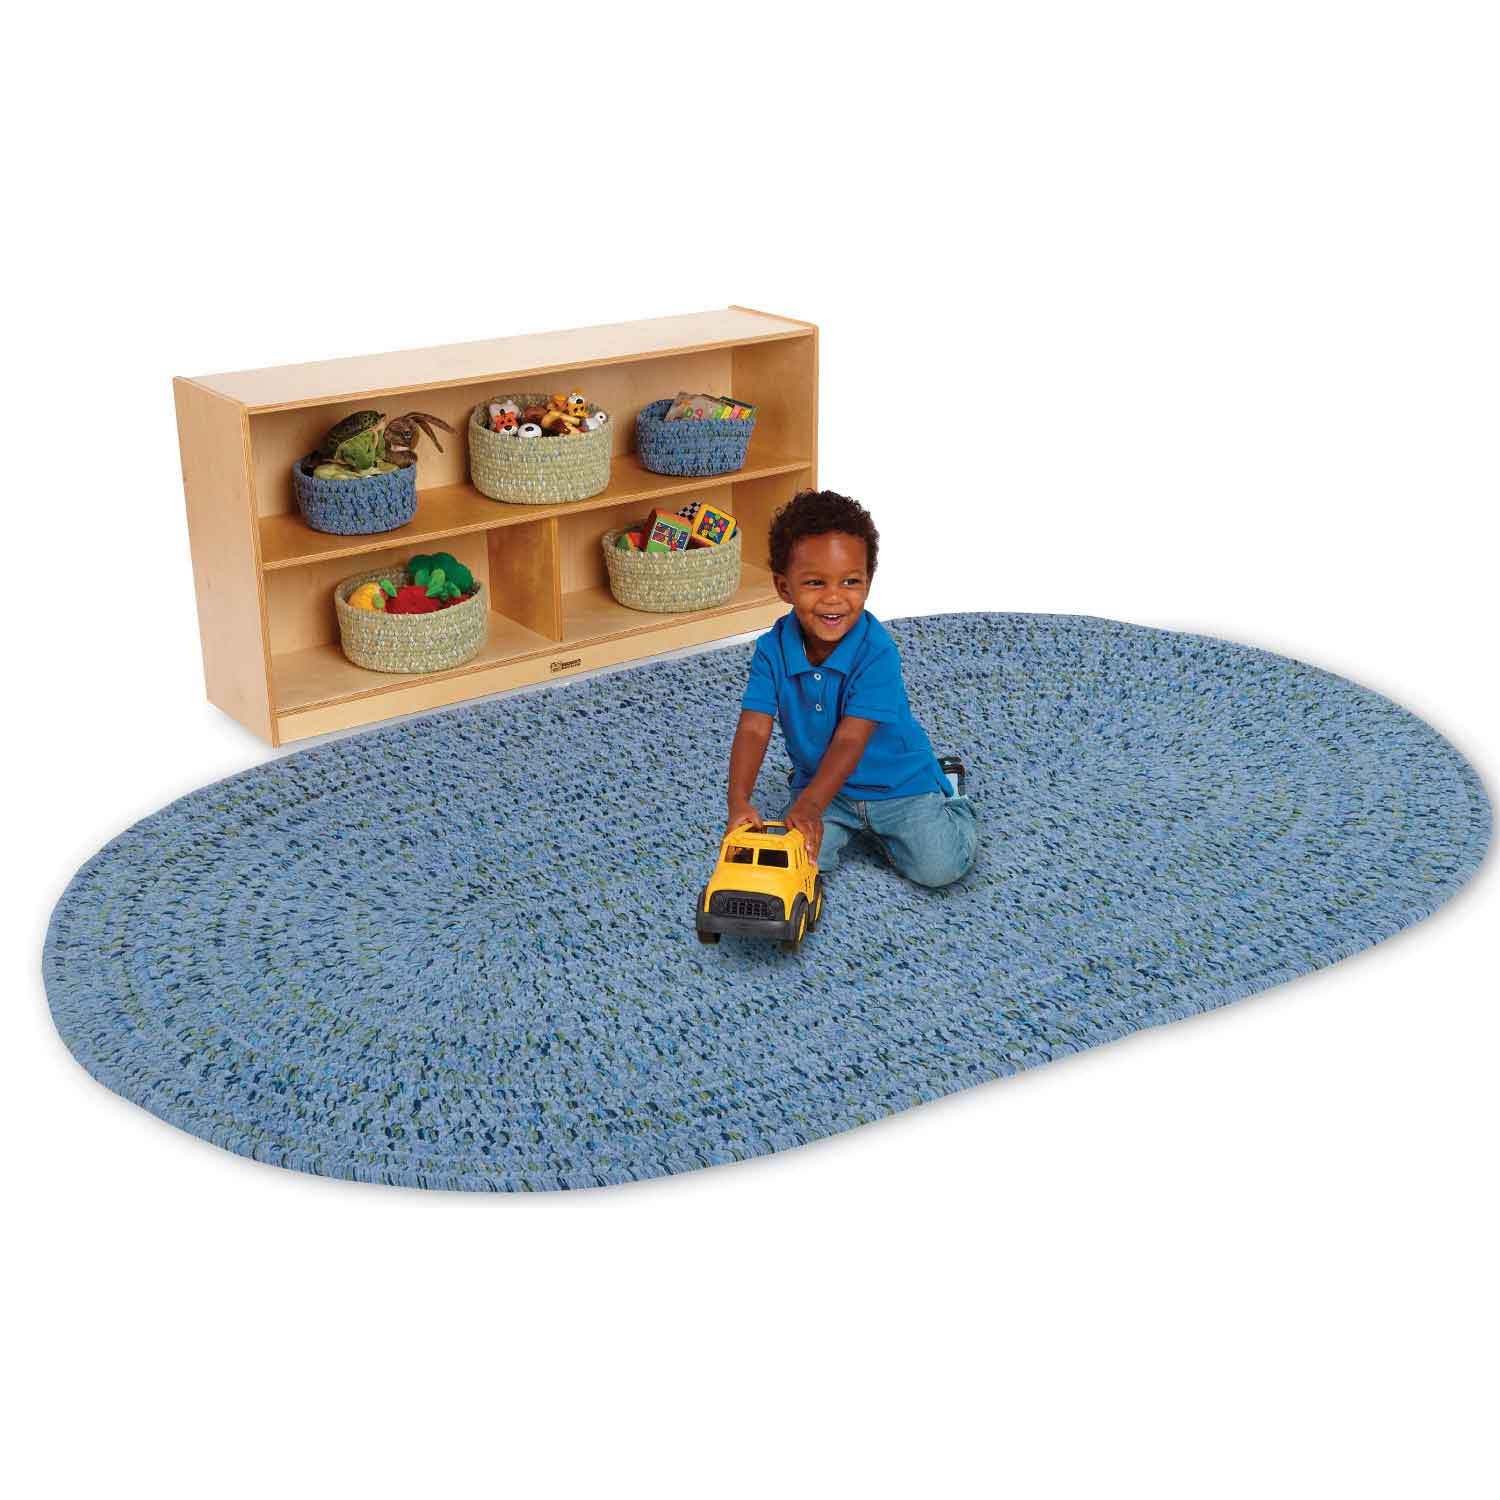 Becker's Misty Bay Classroom Rug Collection